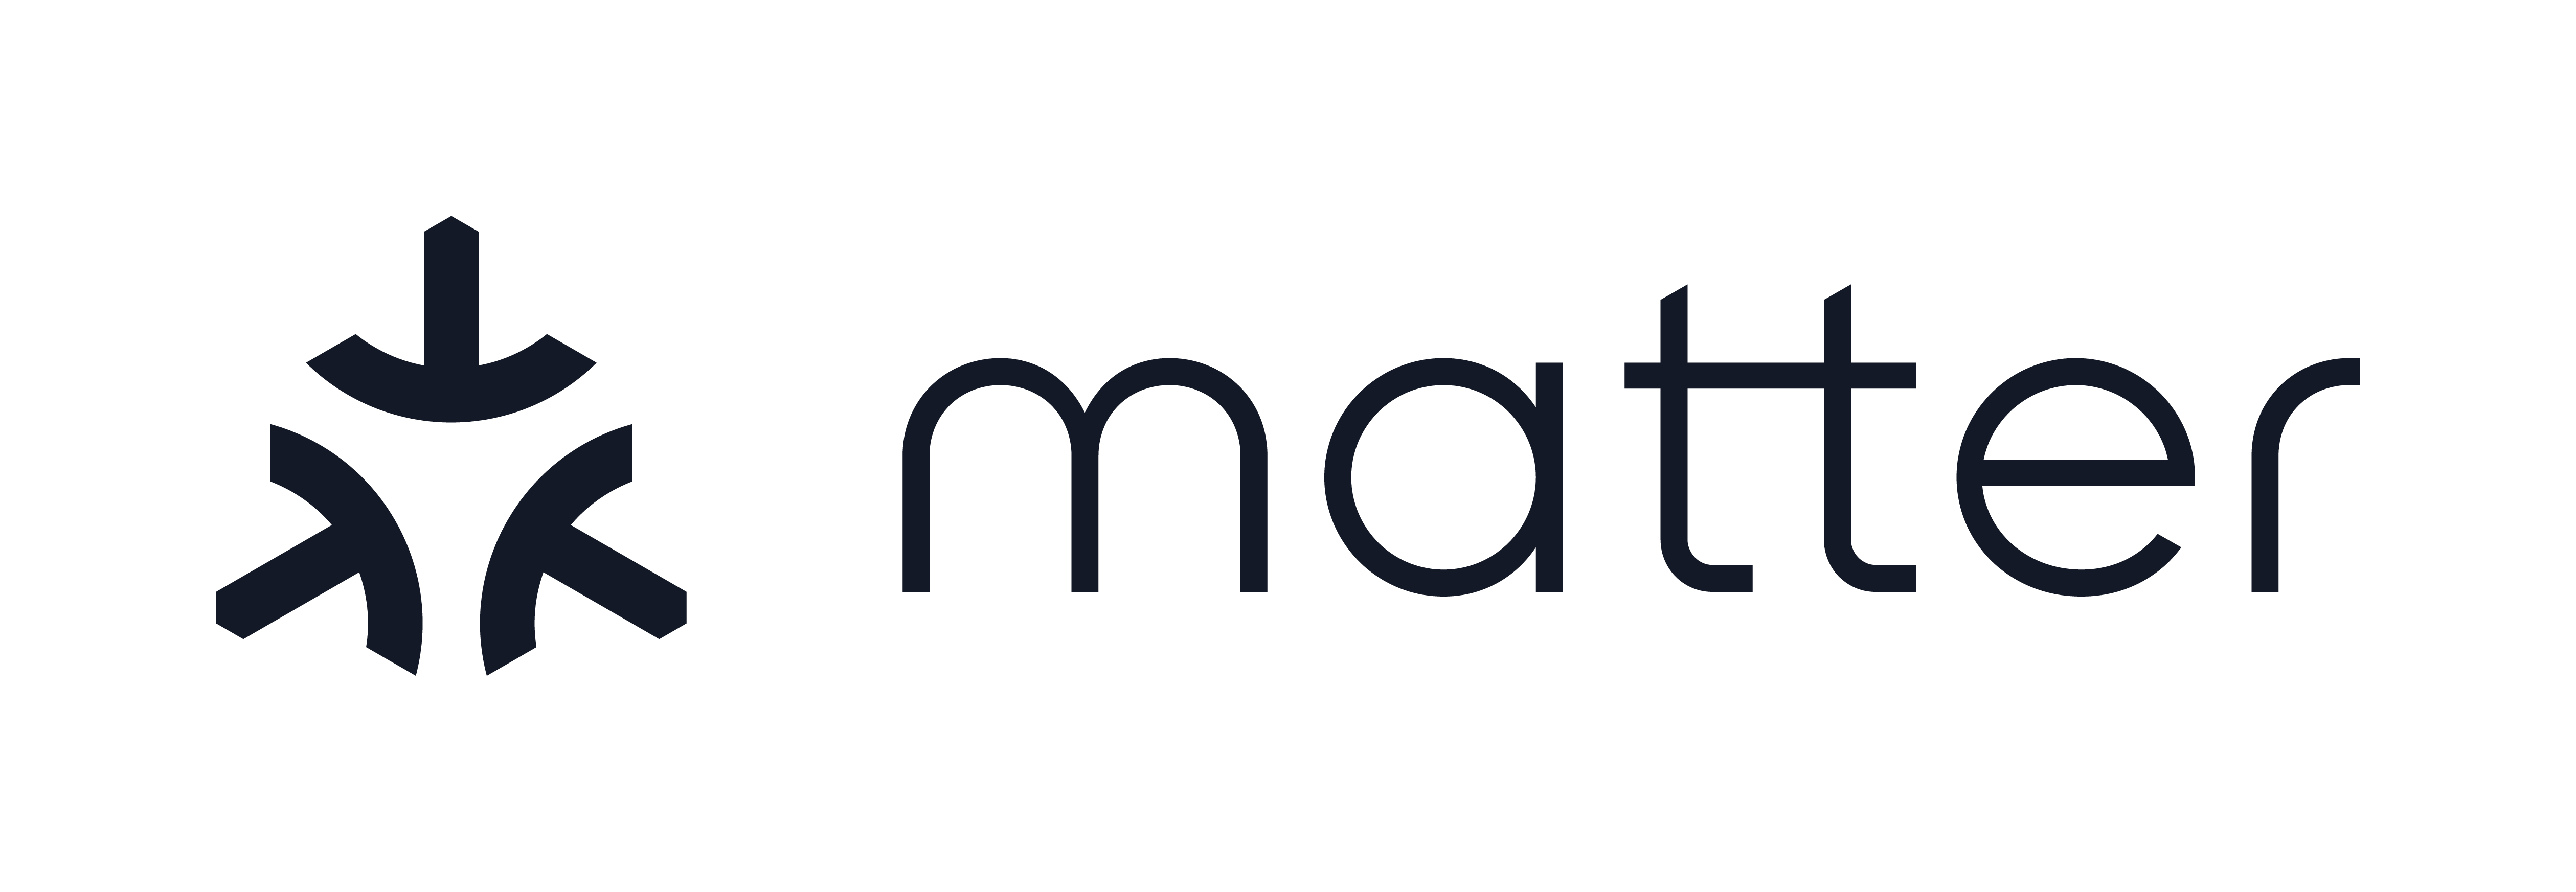 The logo for Matter, a forthcoming standard for smart home devices.